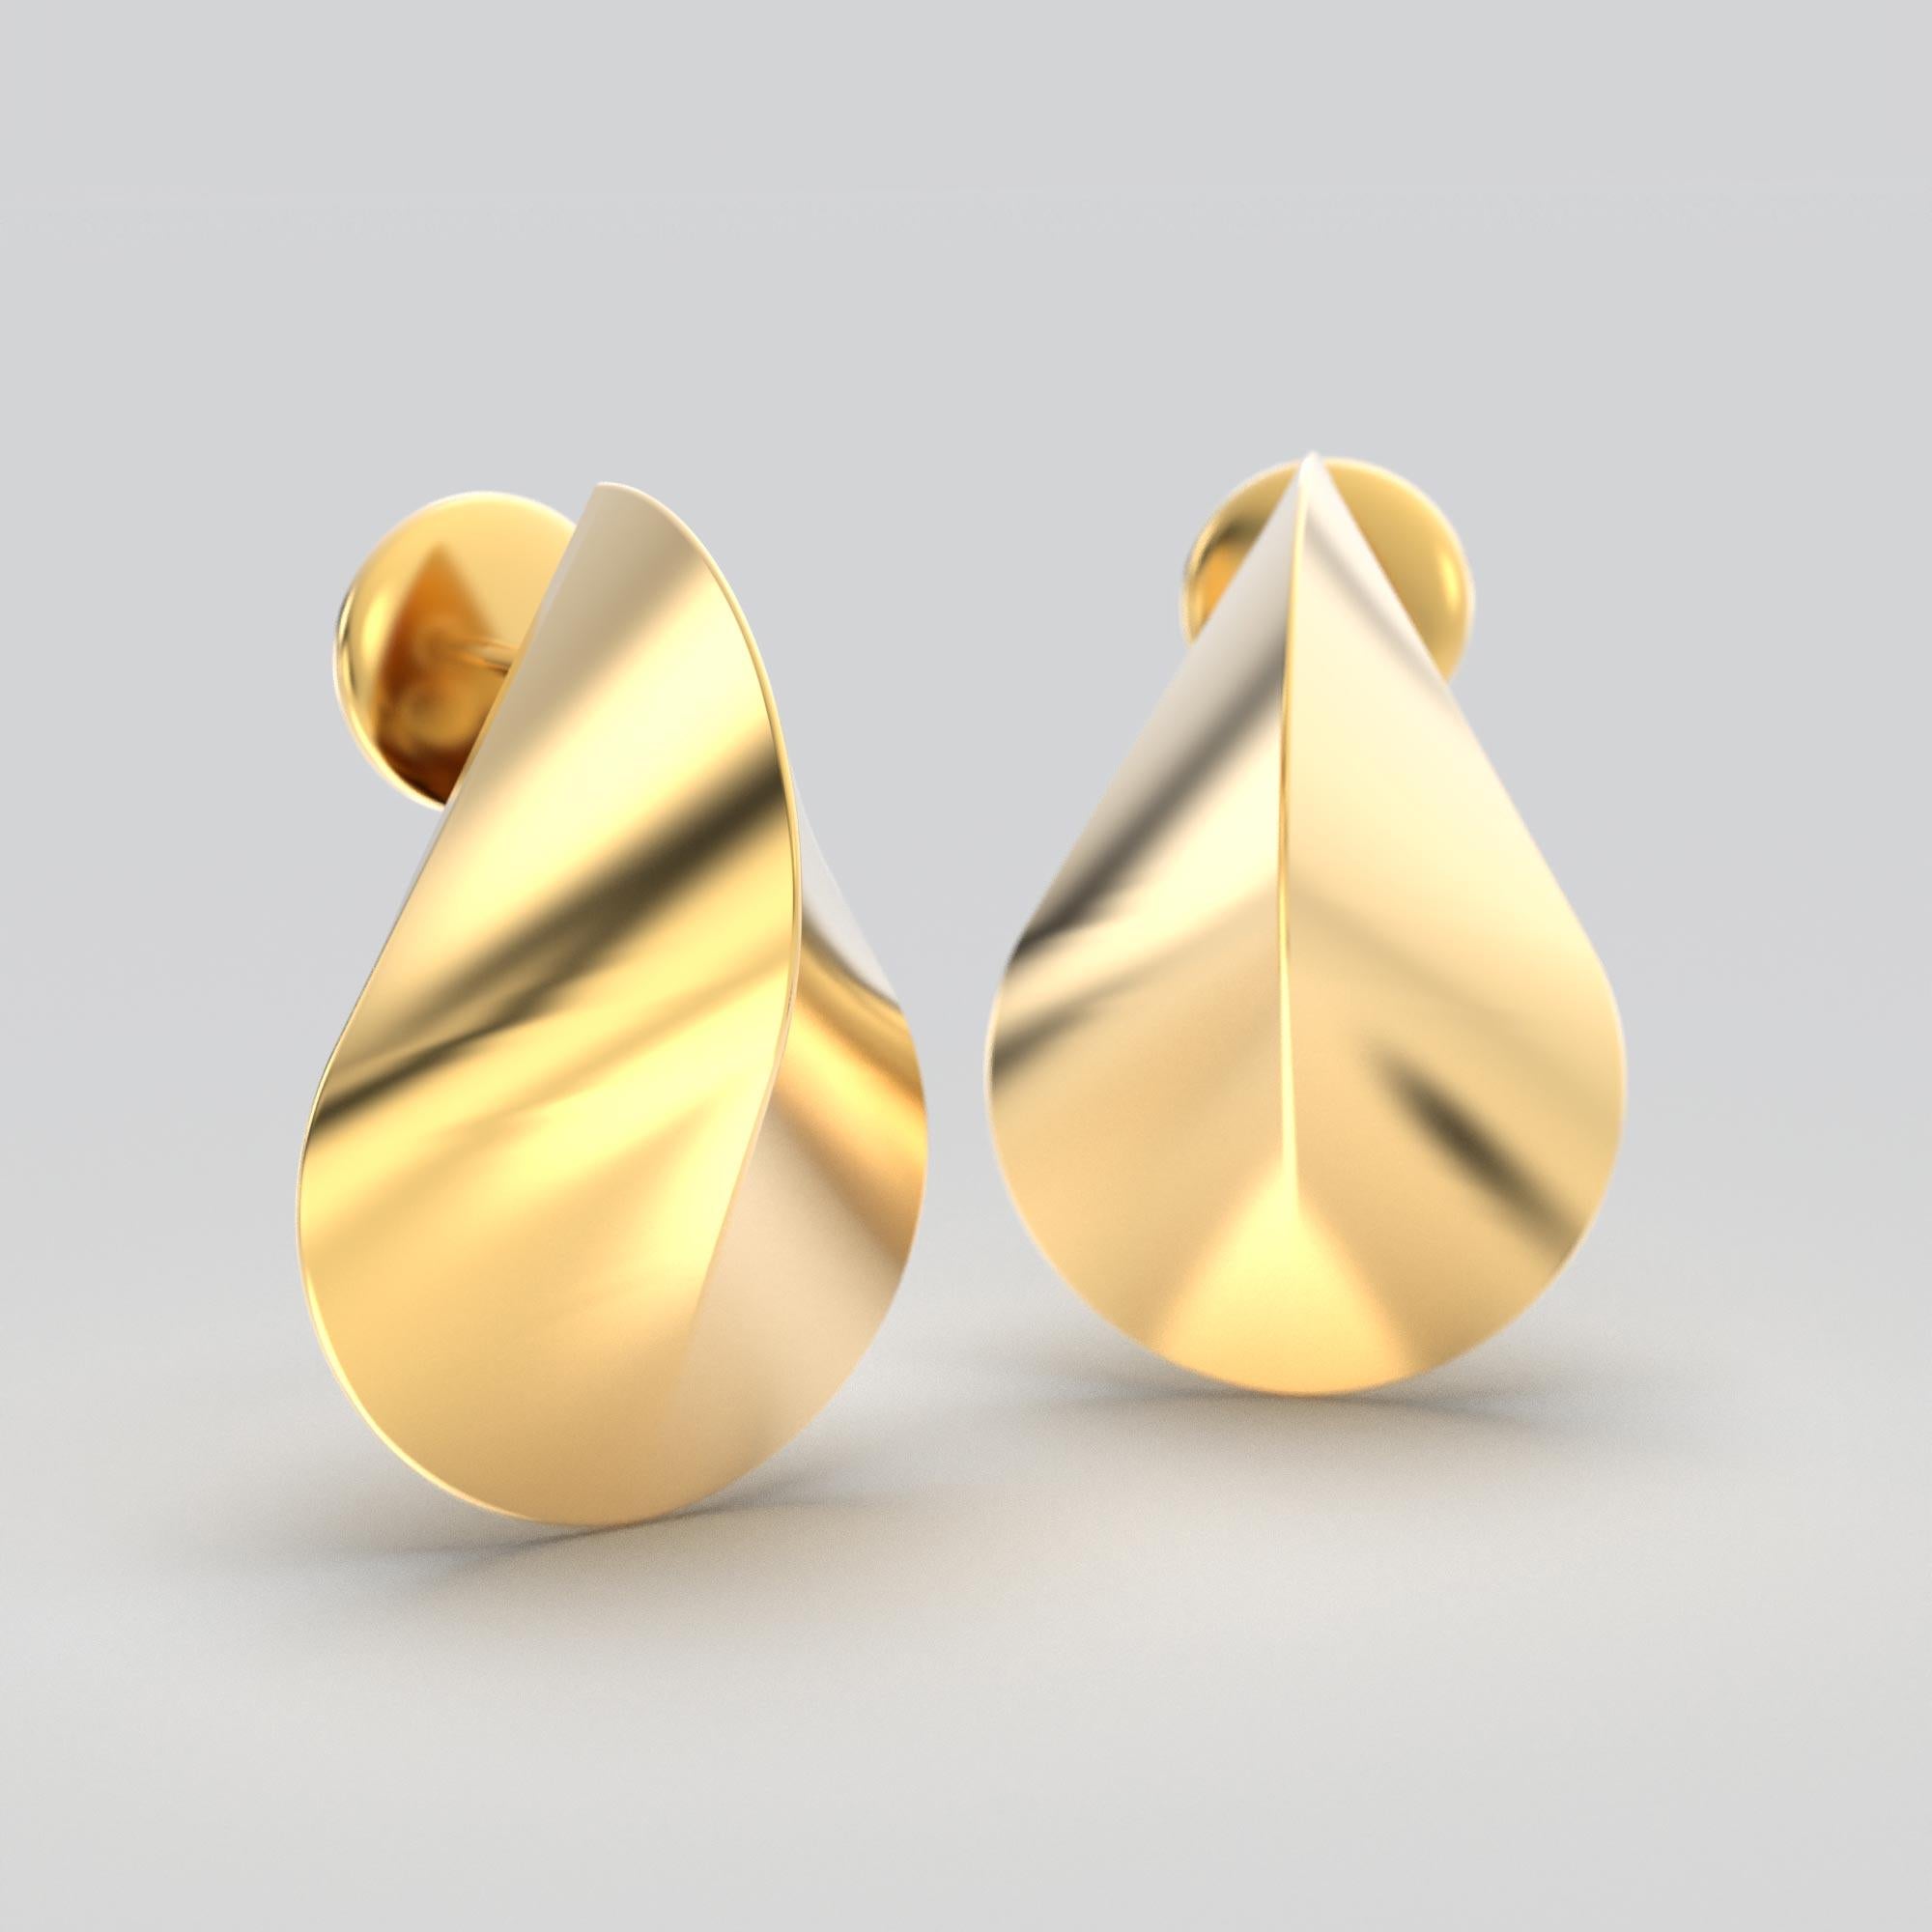 Italian 14k Gold Earrings, Modern Elegant Earrings by Oltremare Gioielli In New Condition For Sale In Camisano Vicentino, VI